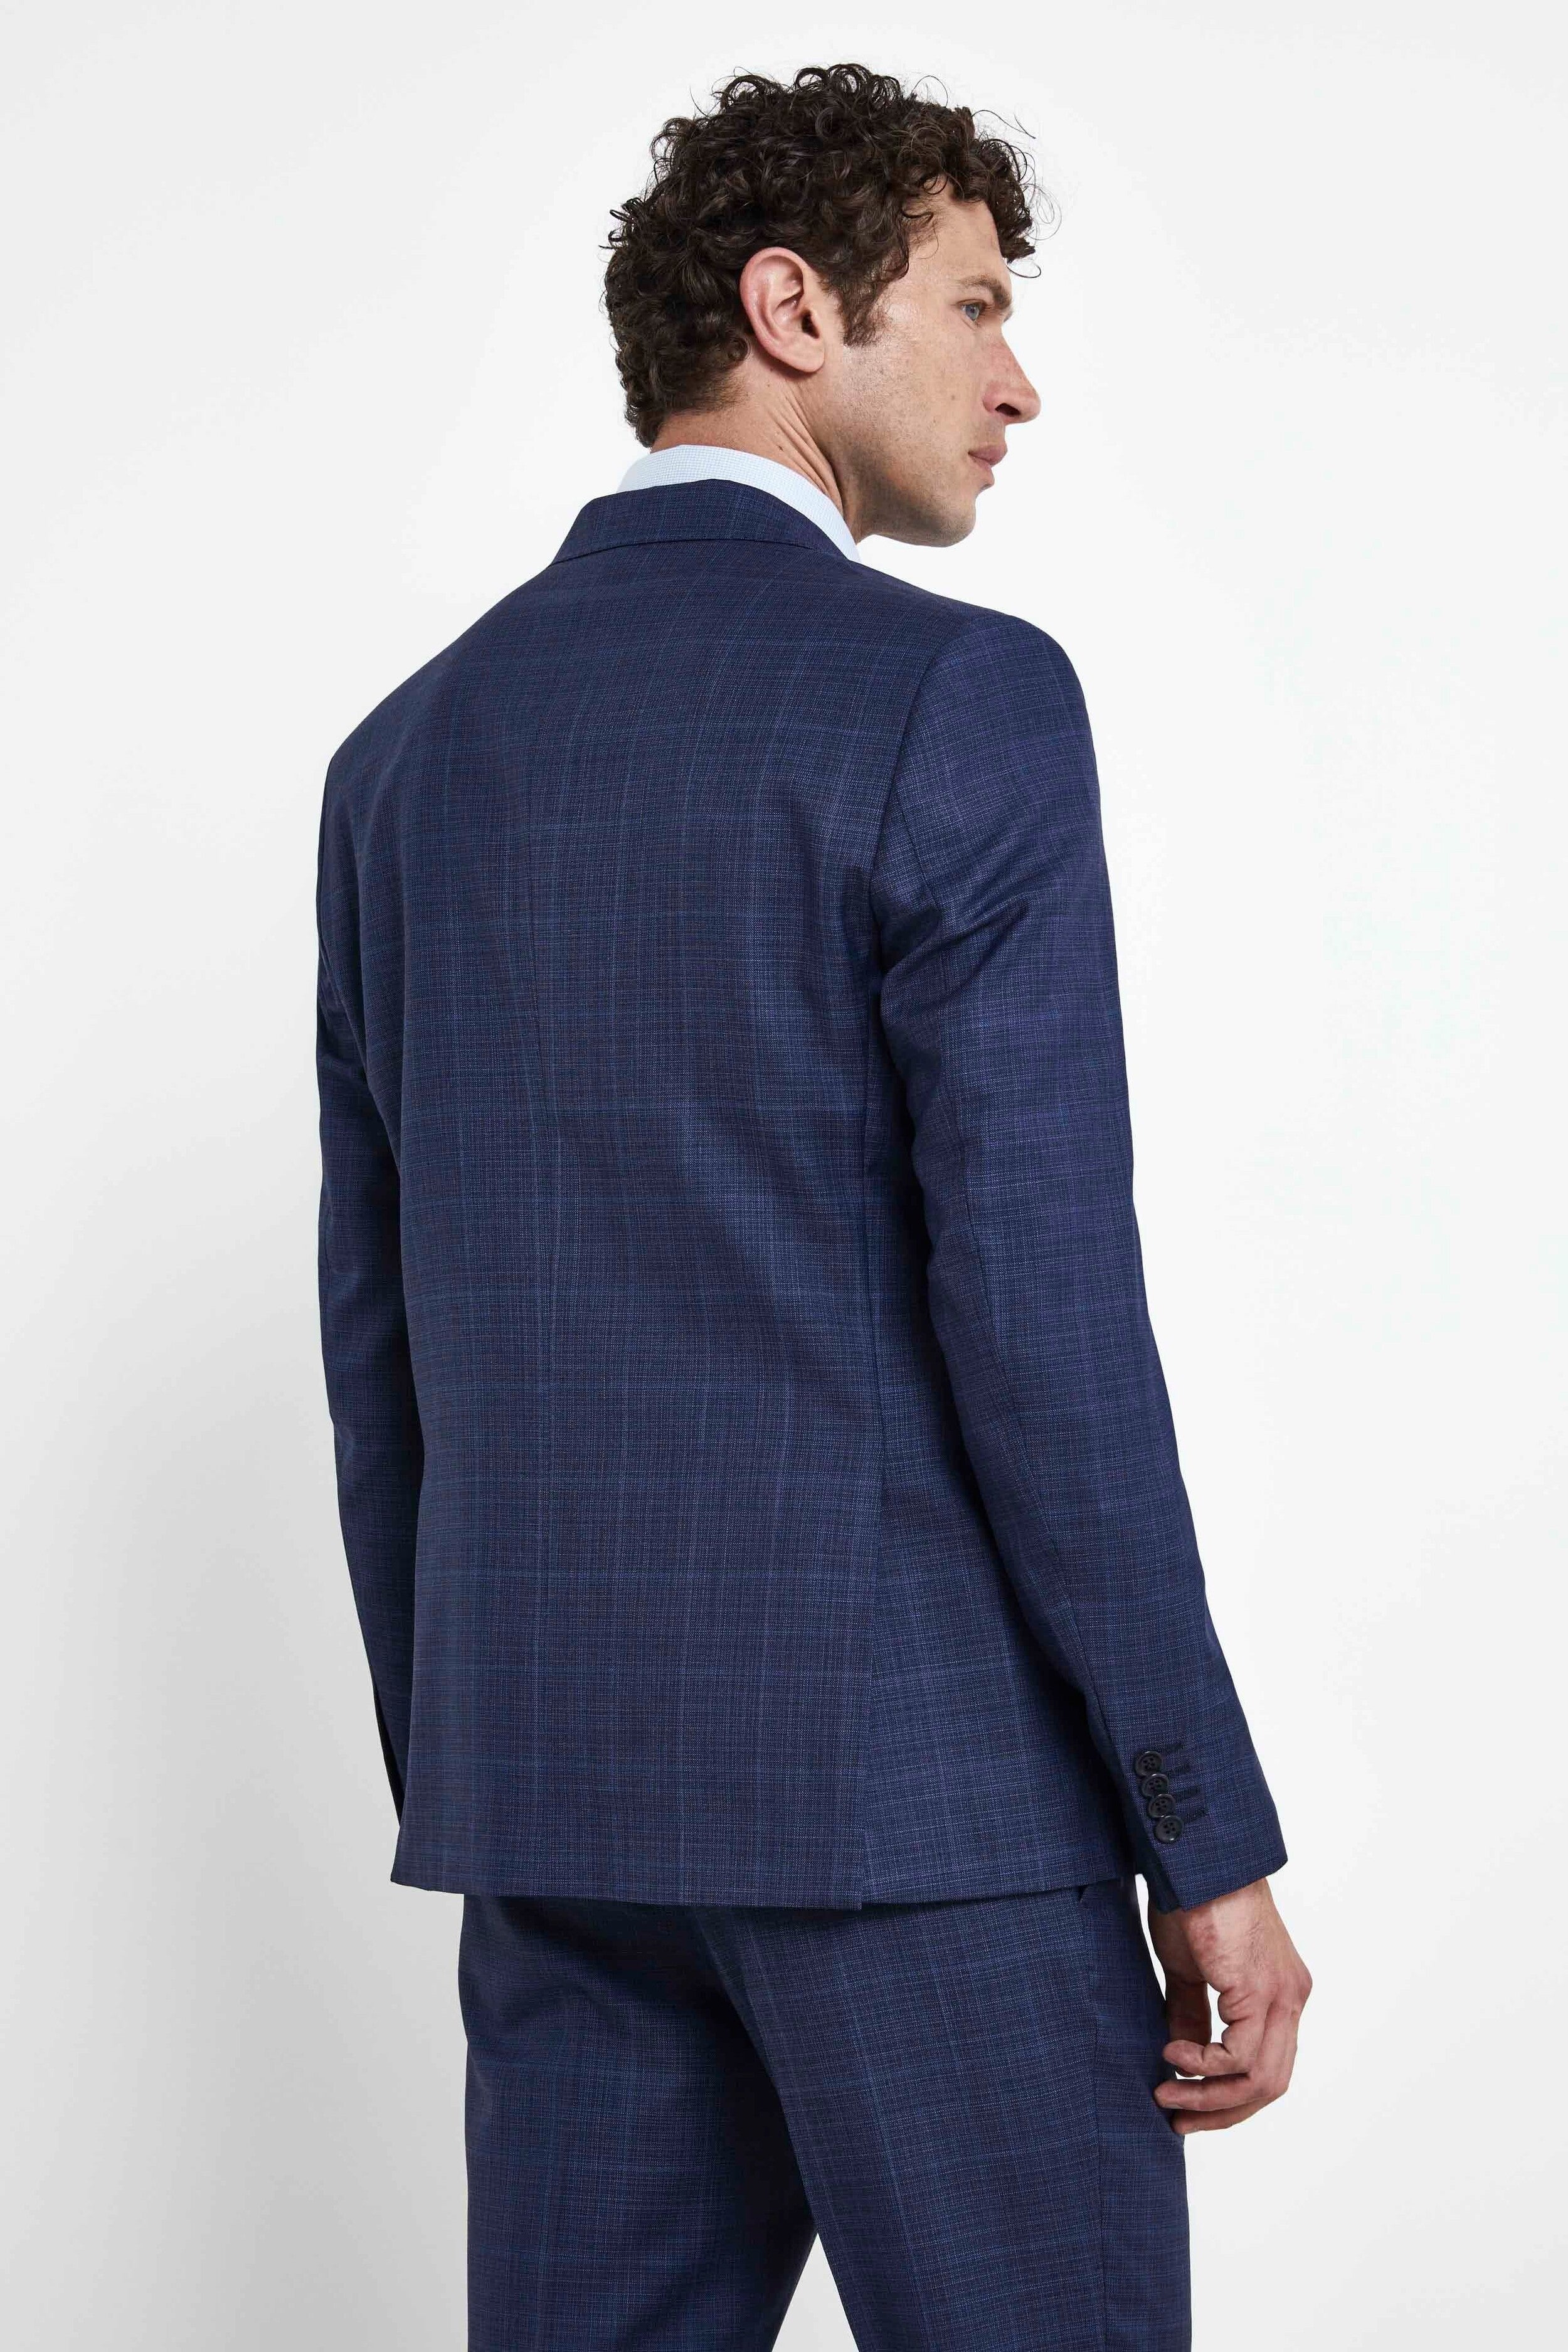 Blue Checkered Suit - Blue check